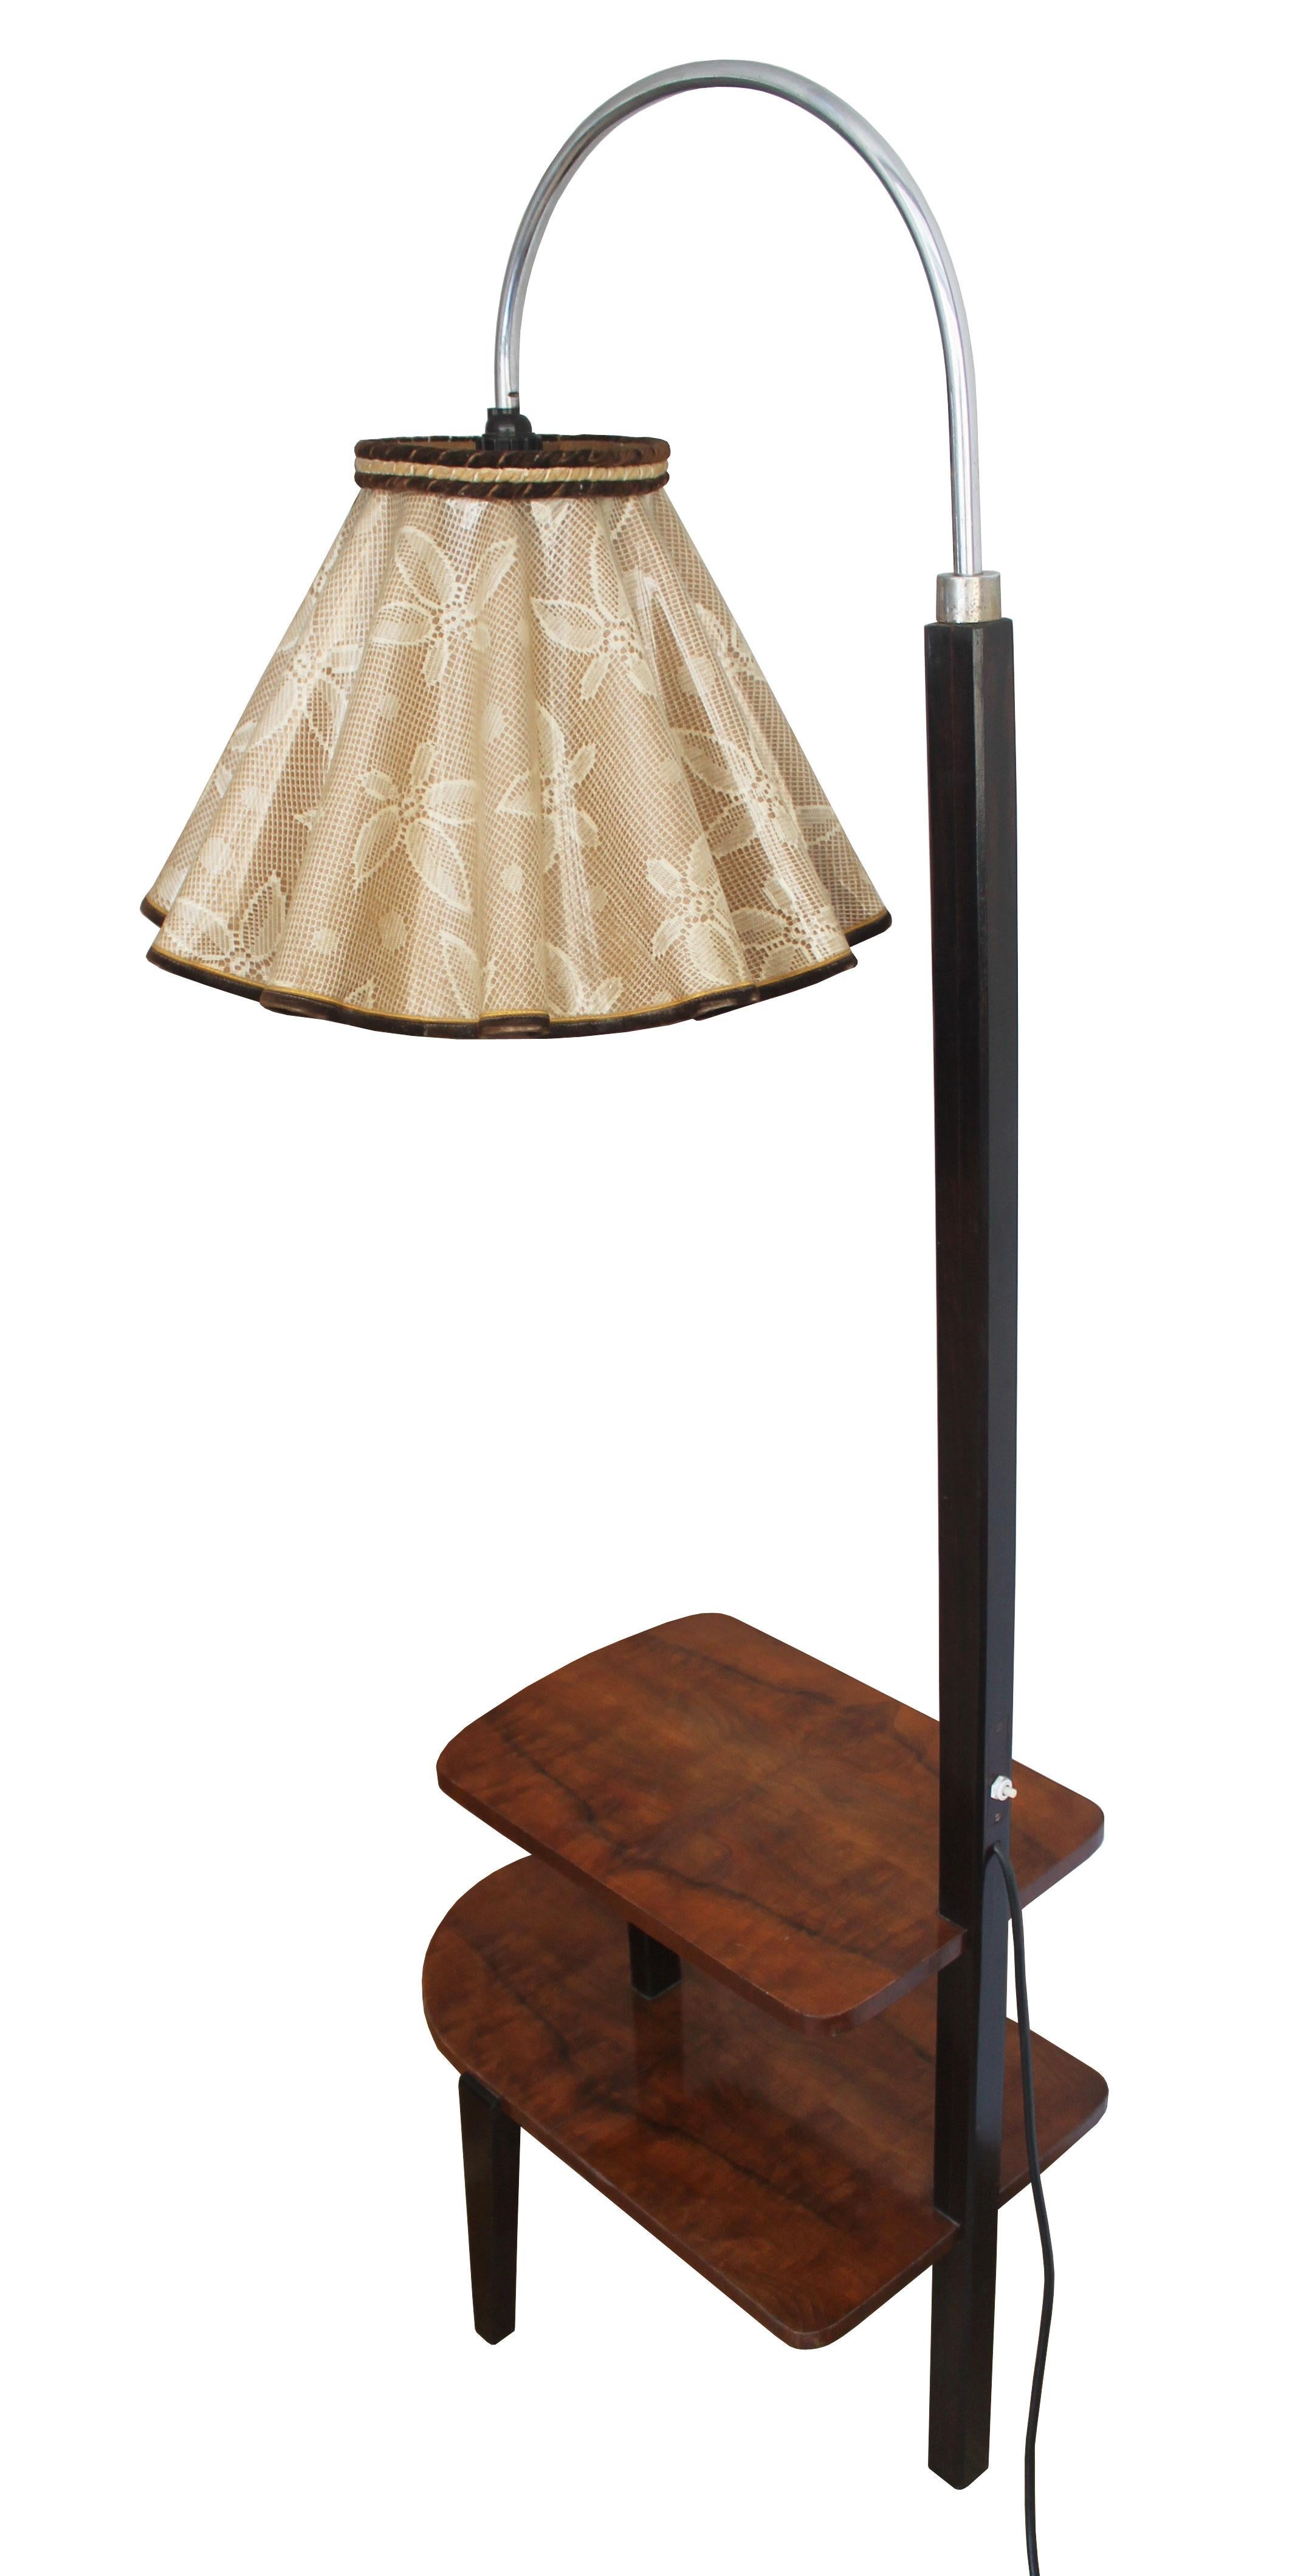 An Art Deco floor lamp with original lampshade and two low level shelves in great vintage condition. This lamp has got an subtle shape and a beautiful wood combination of walnut veneer, and dark beech together with a delicate floral pattern on the